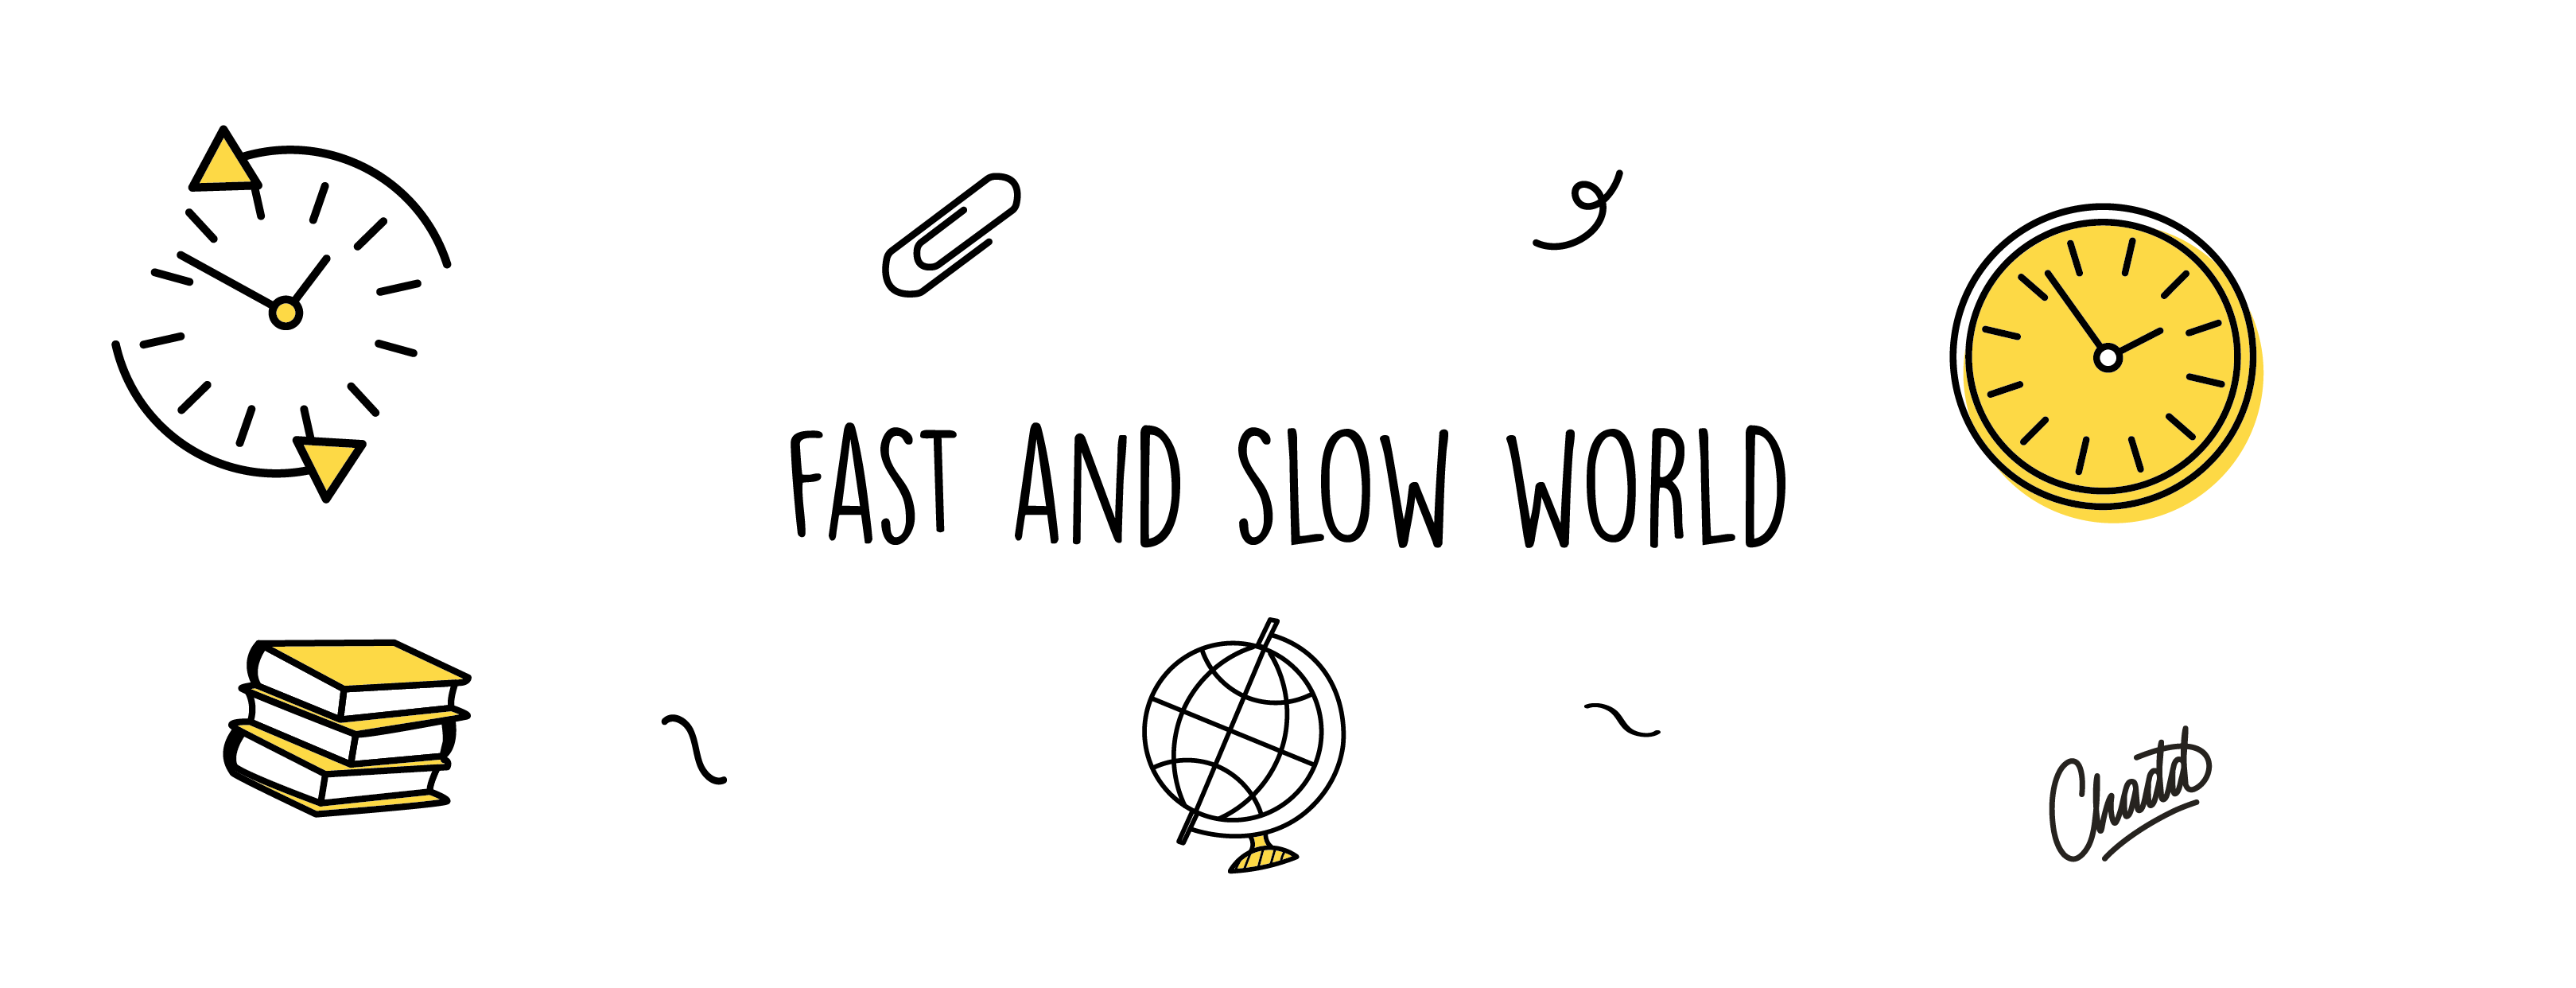 fast and slow world